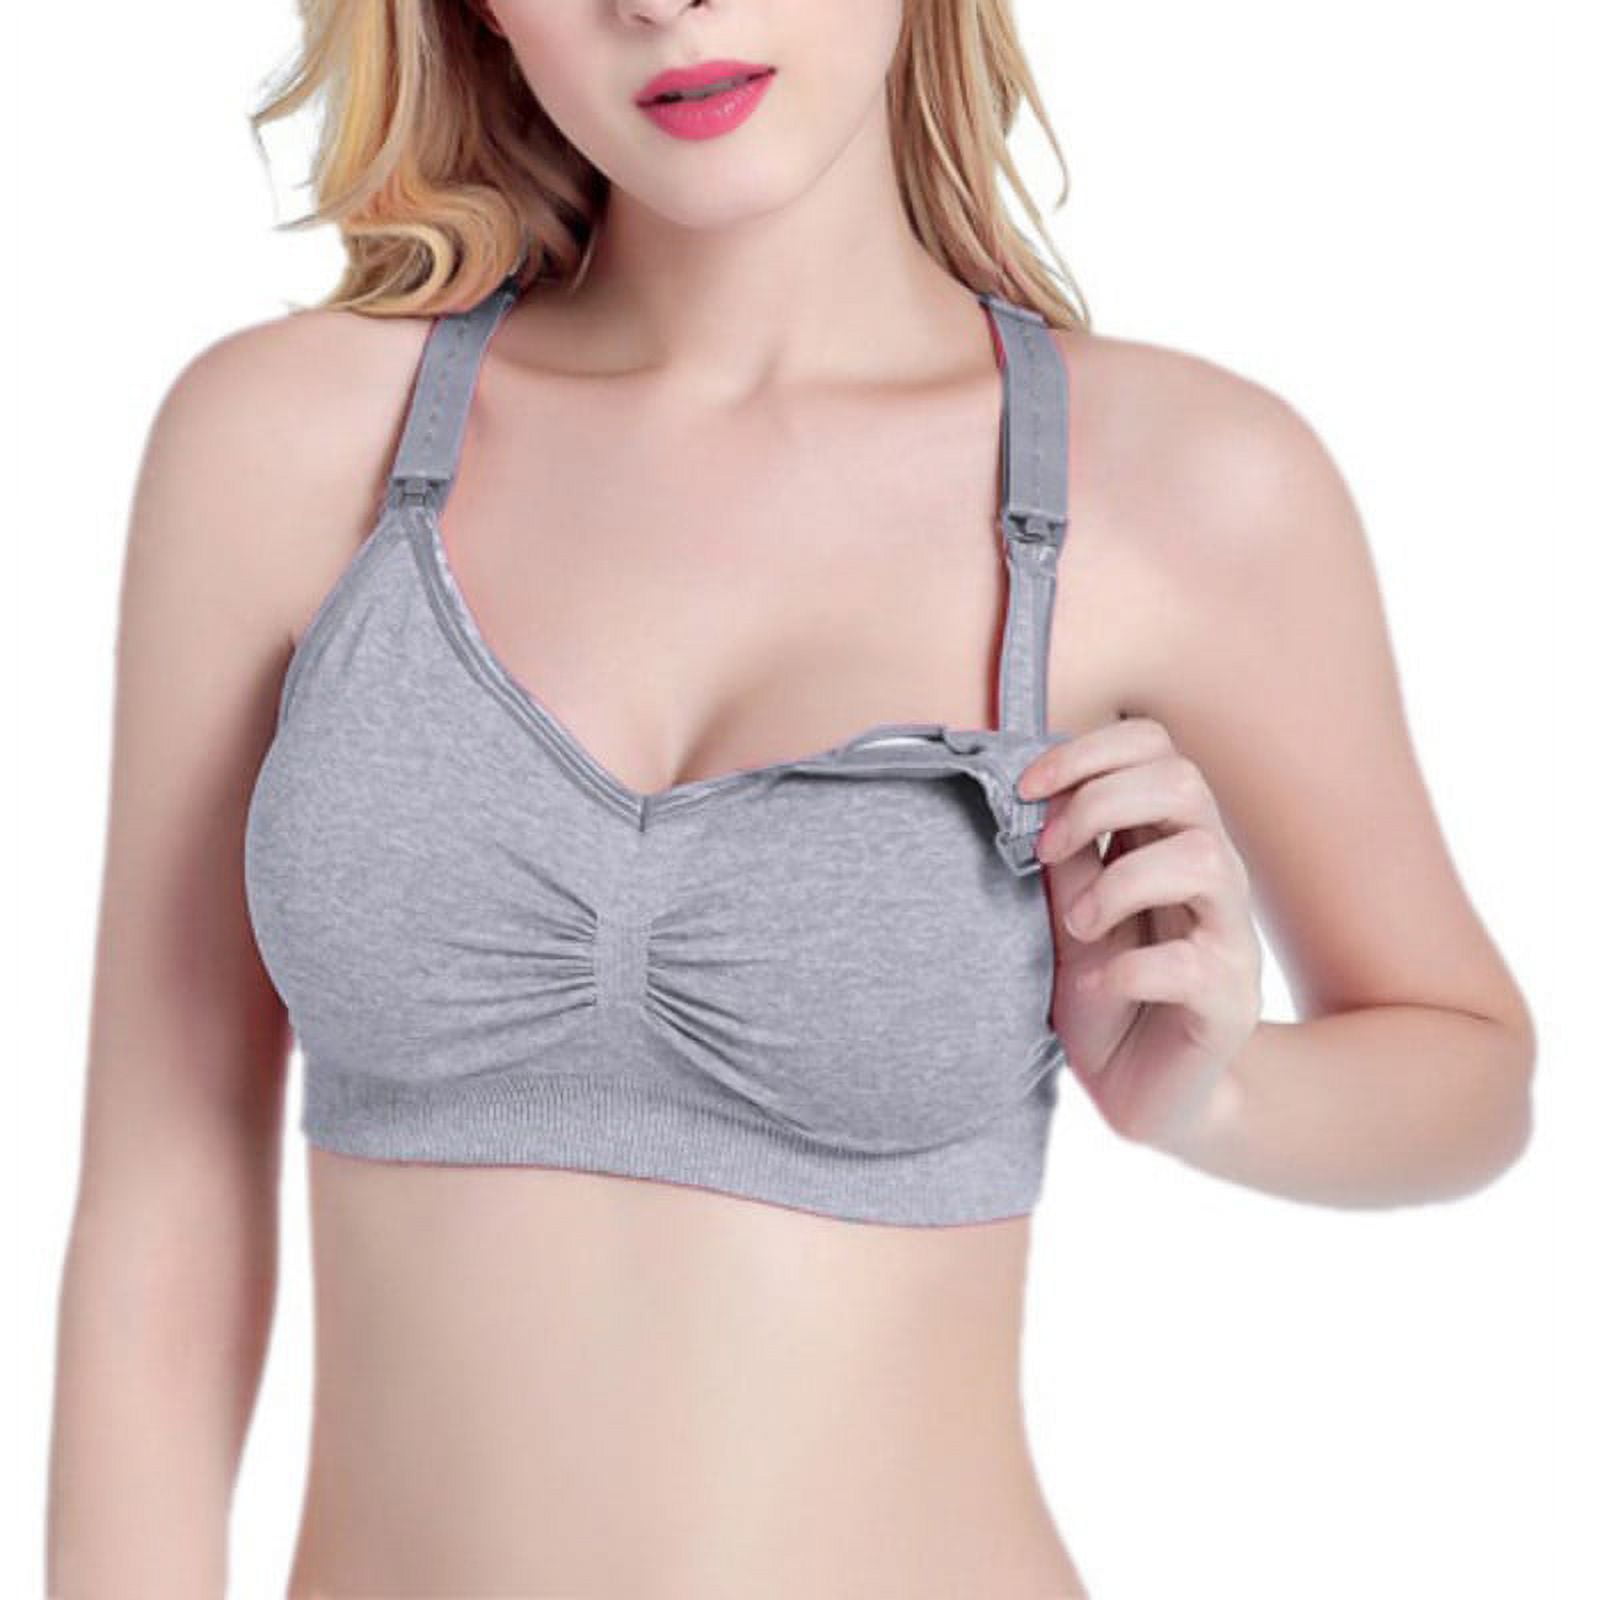 Most moms don't wear the right size nursing bra. Call us for help